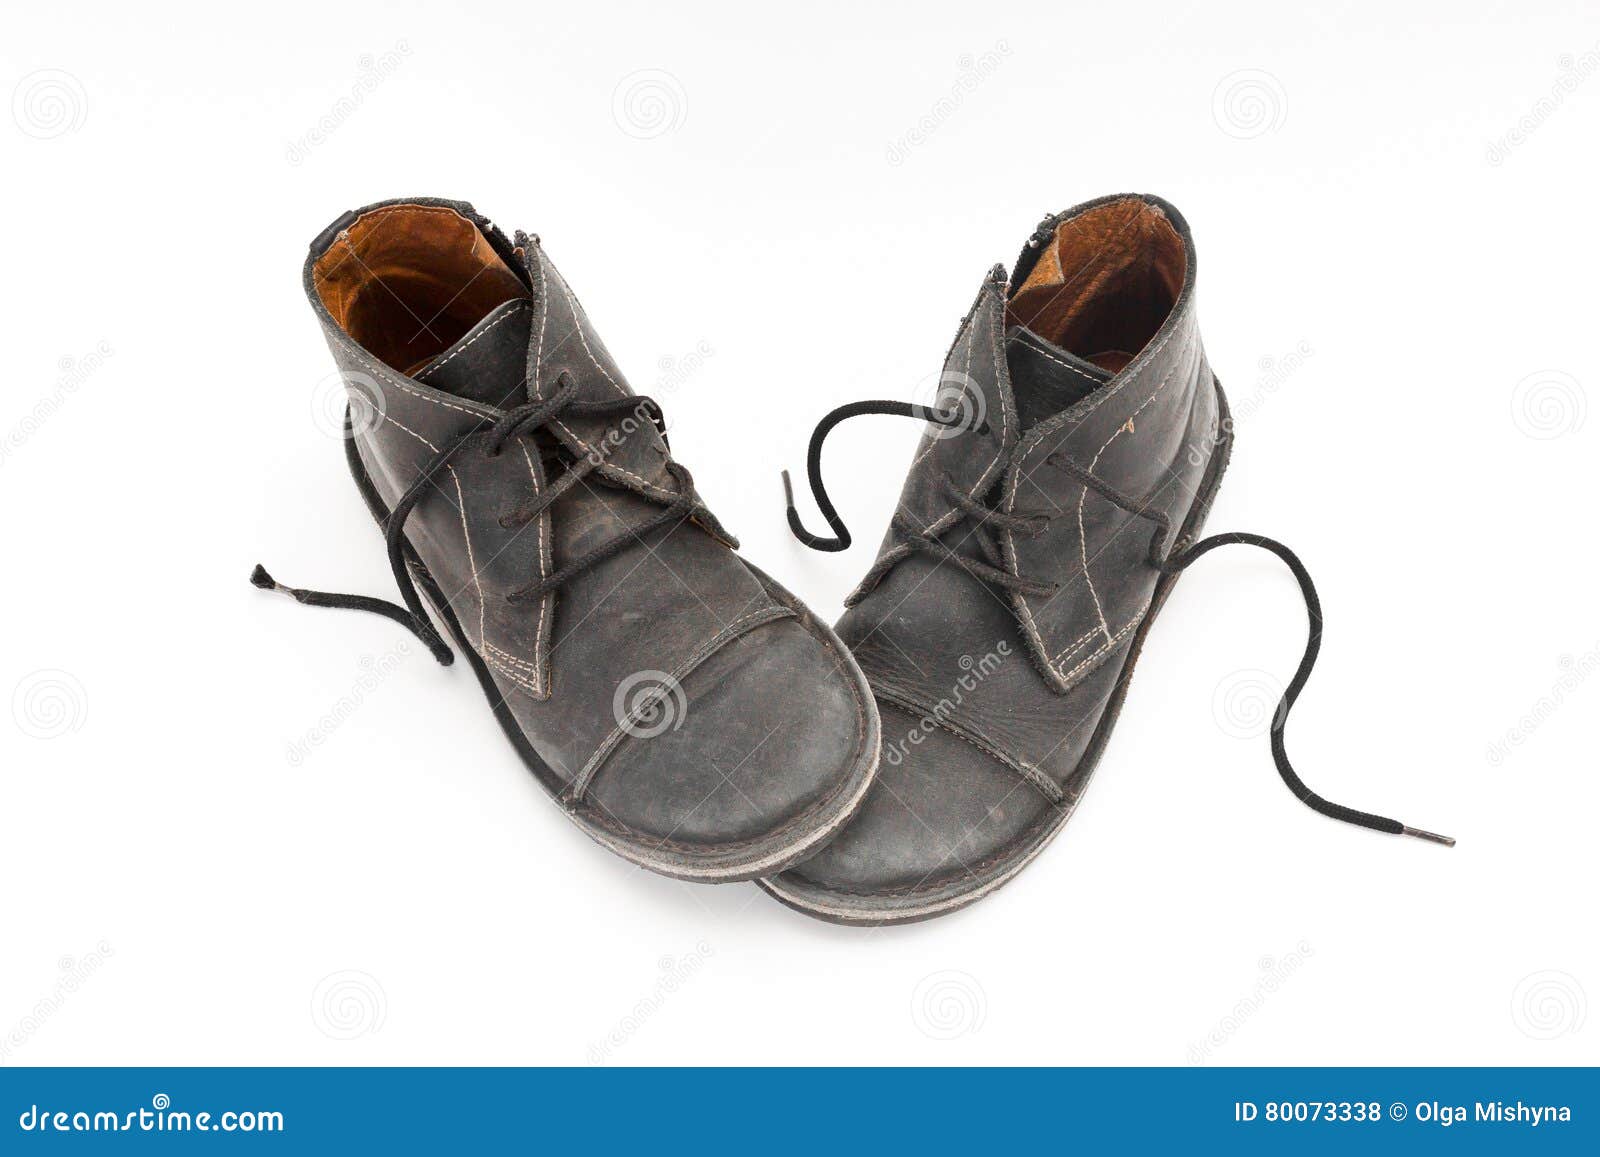 Old Black Male Shoes Isolated on White Stock Photo - Image of foot ...